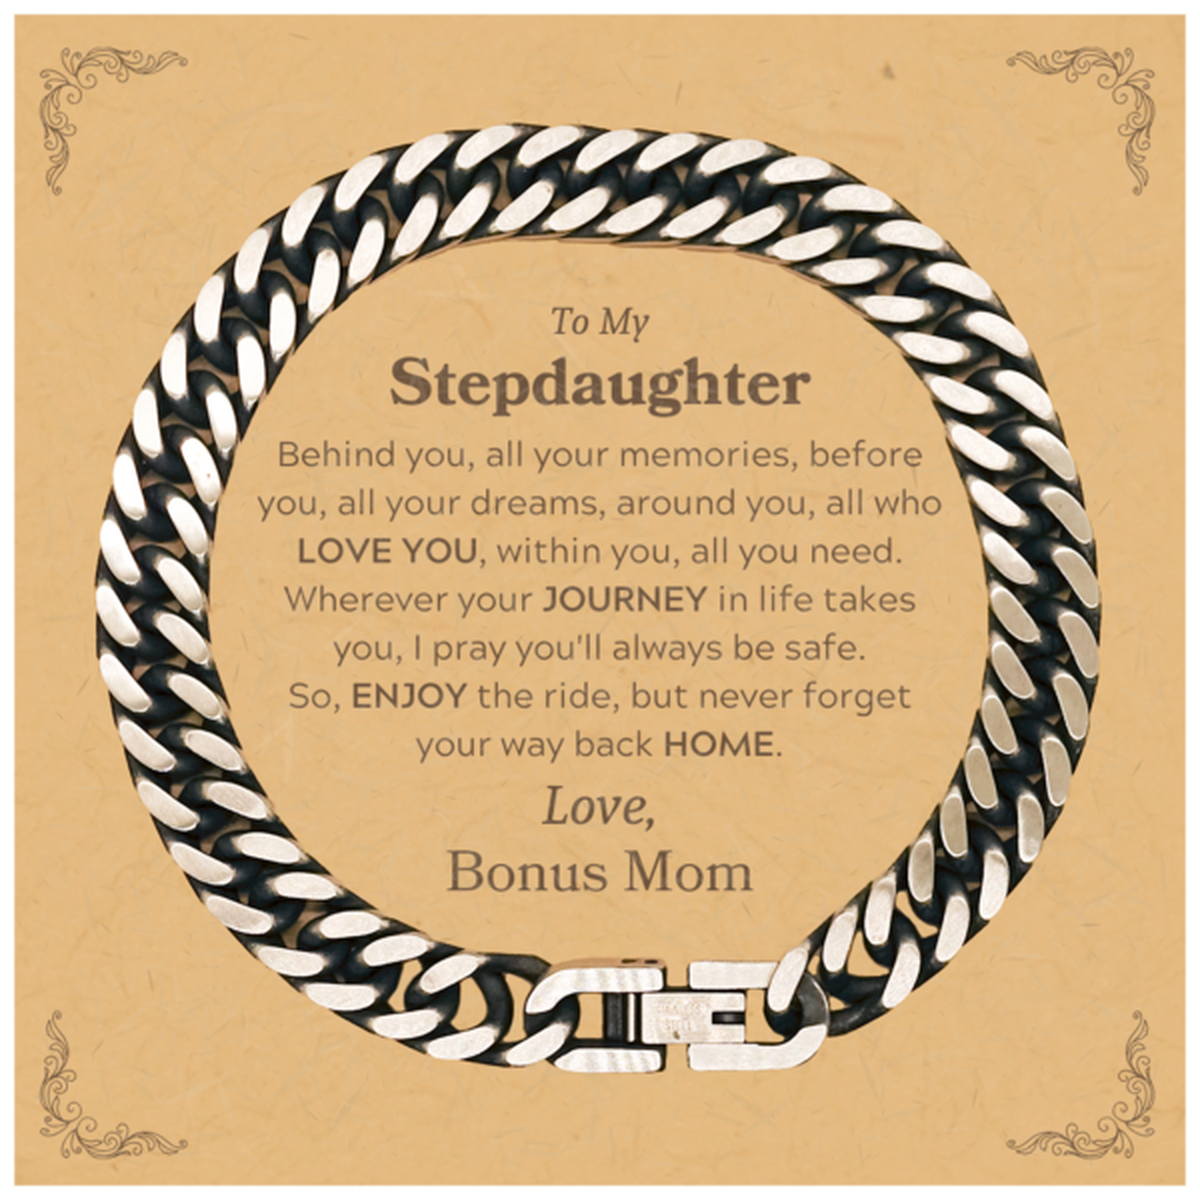 To My Stepdaughter Graduation Gifts from Bonus Mom, Stepdaughter Cuban Link Chain Bracelet Christmas Birthday Gifts for Stepdaughter Behind you, all your memories, before you, all your dreams. Love, Bonus Mom